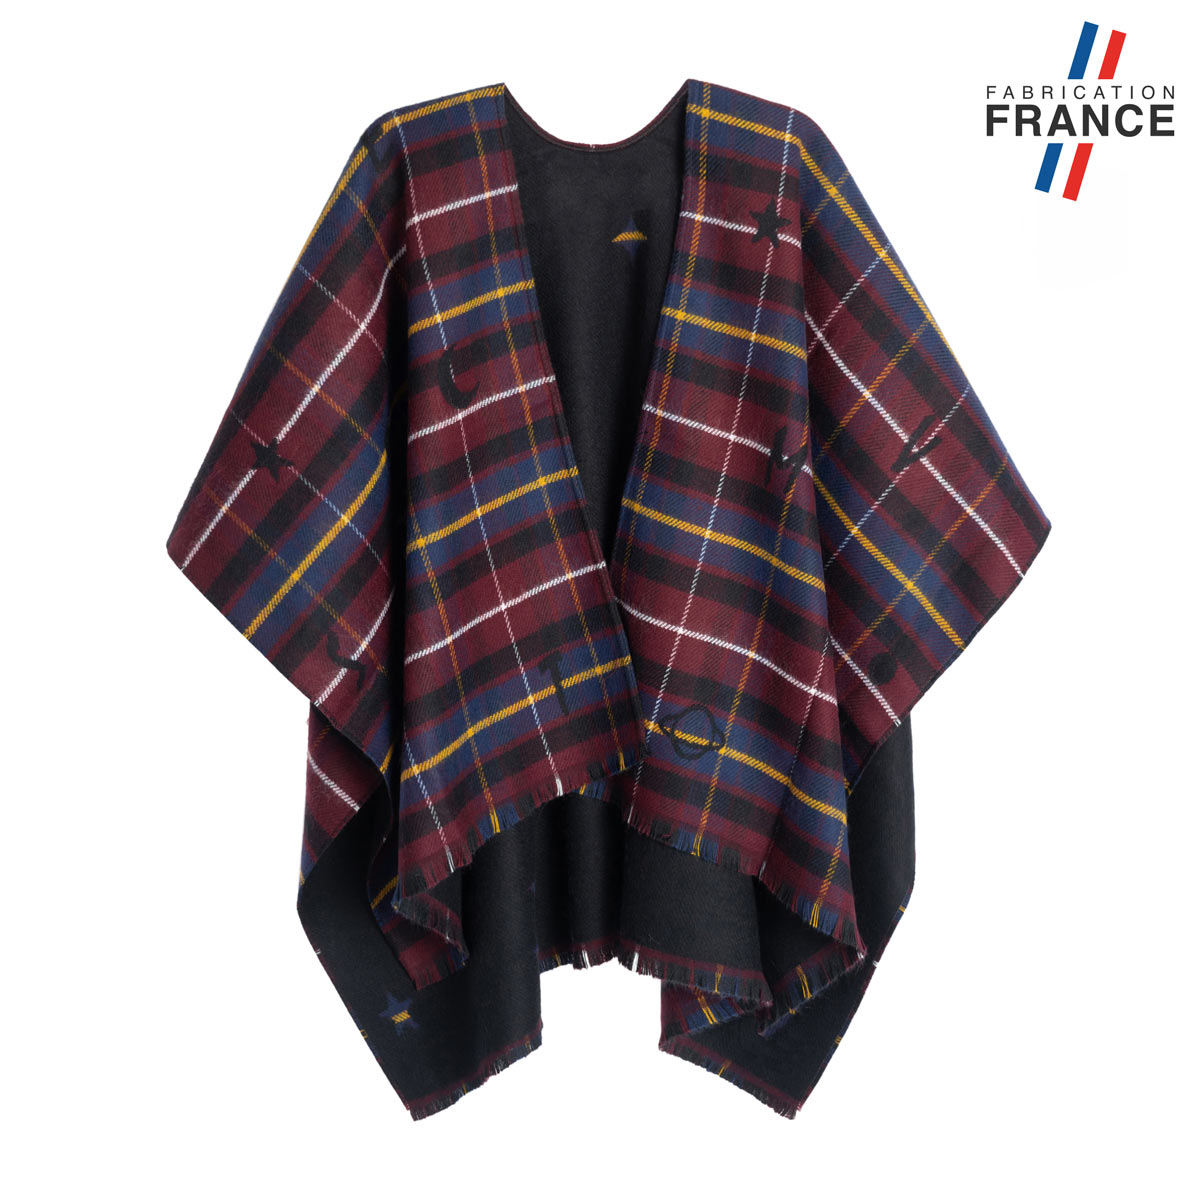 Poncho-femme-bordeaux-made-in-france--AT-06764_F12-1FR